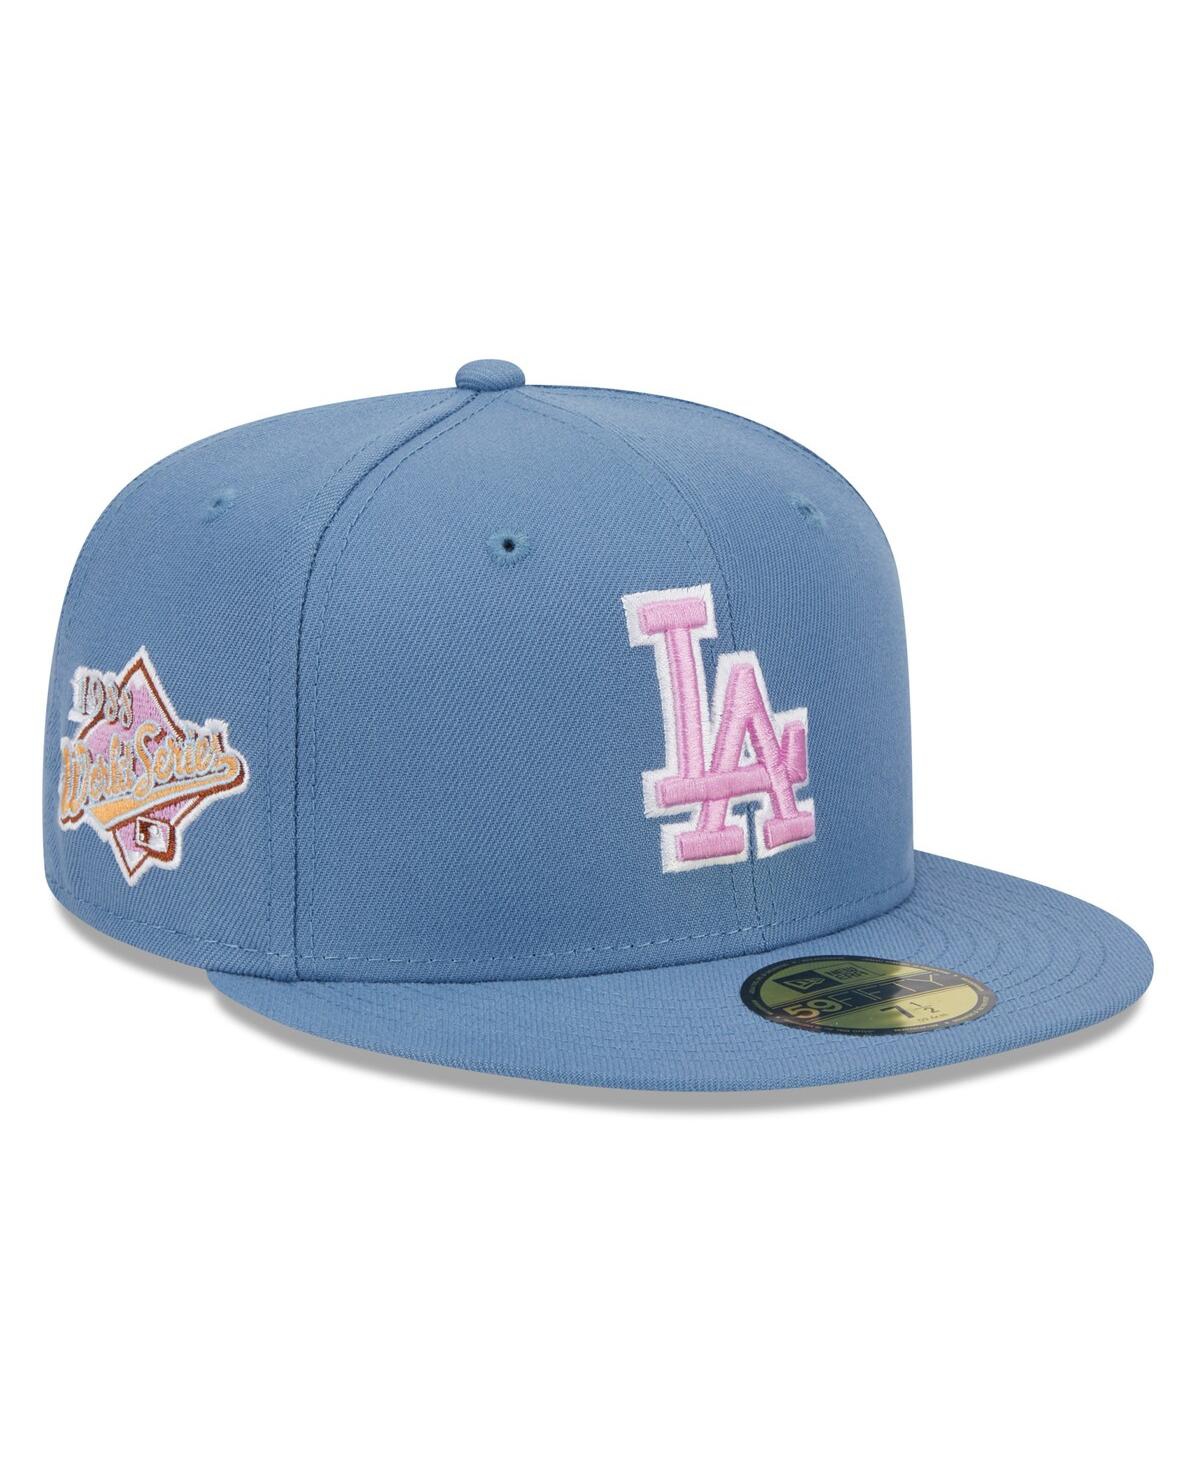 Shop New Era Men's Los Angeles Dodgers Faded Blue Color Pack 59fifty Fitted Hat